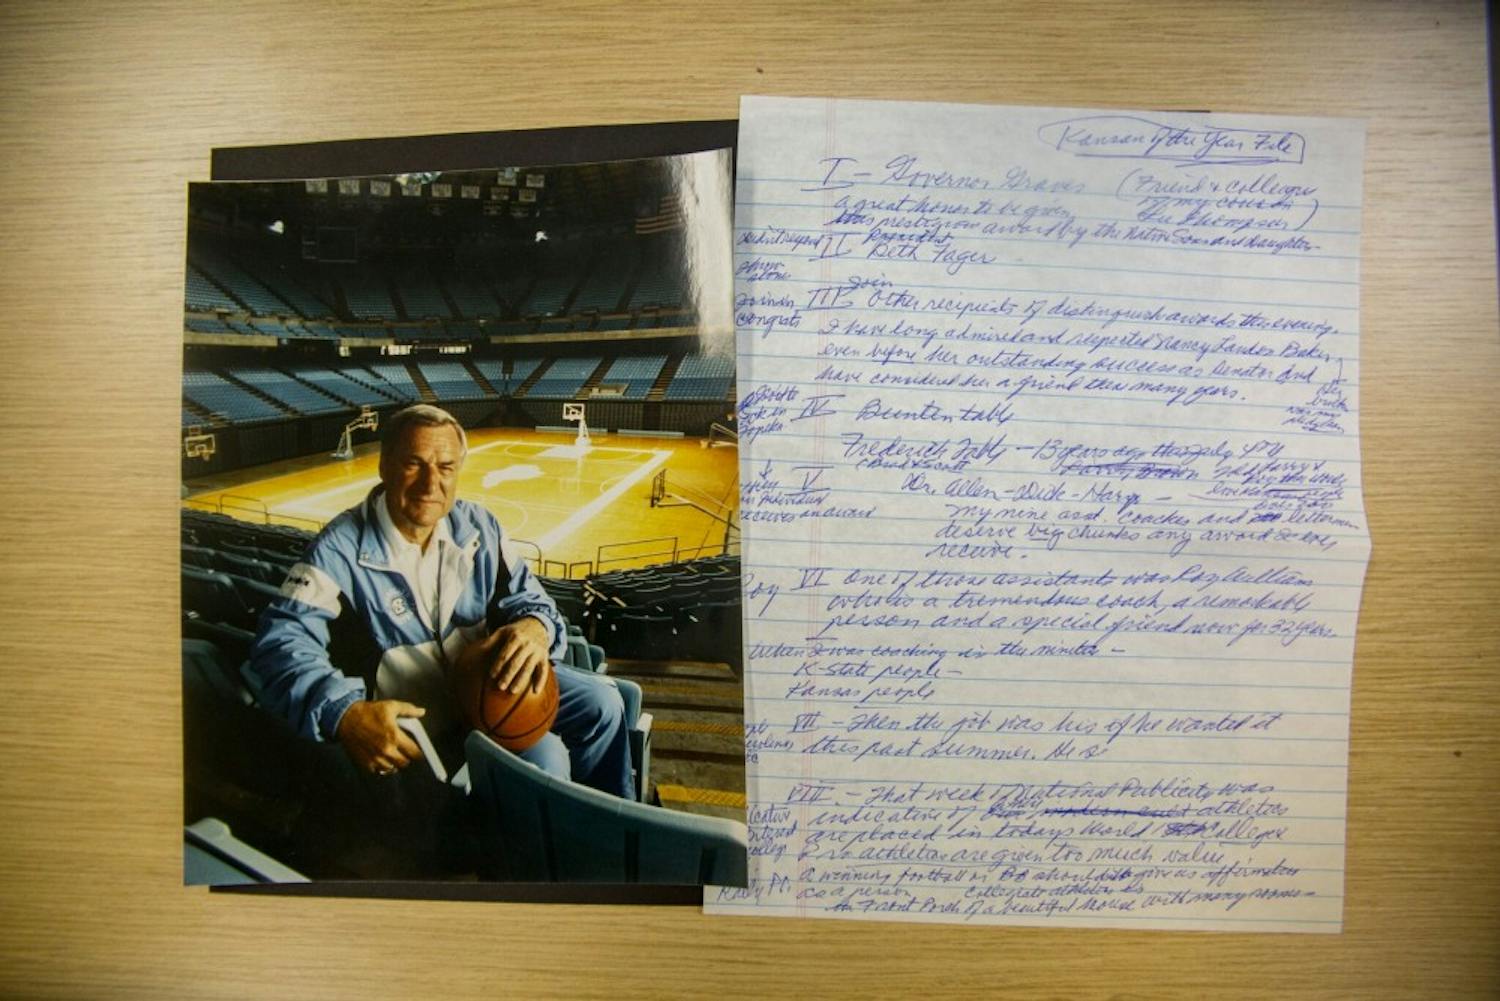 A photo of Dean Smith in the Dean Smith Center rests next to hand written notes Smith wrote in preparation for his speech in 2001 after being named Kansan of the Year.